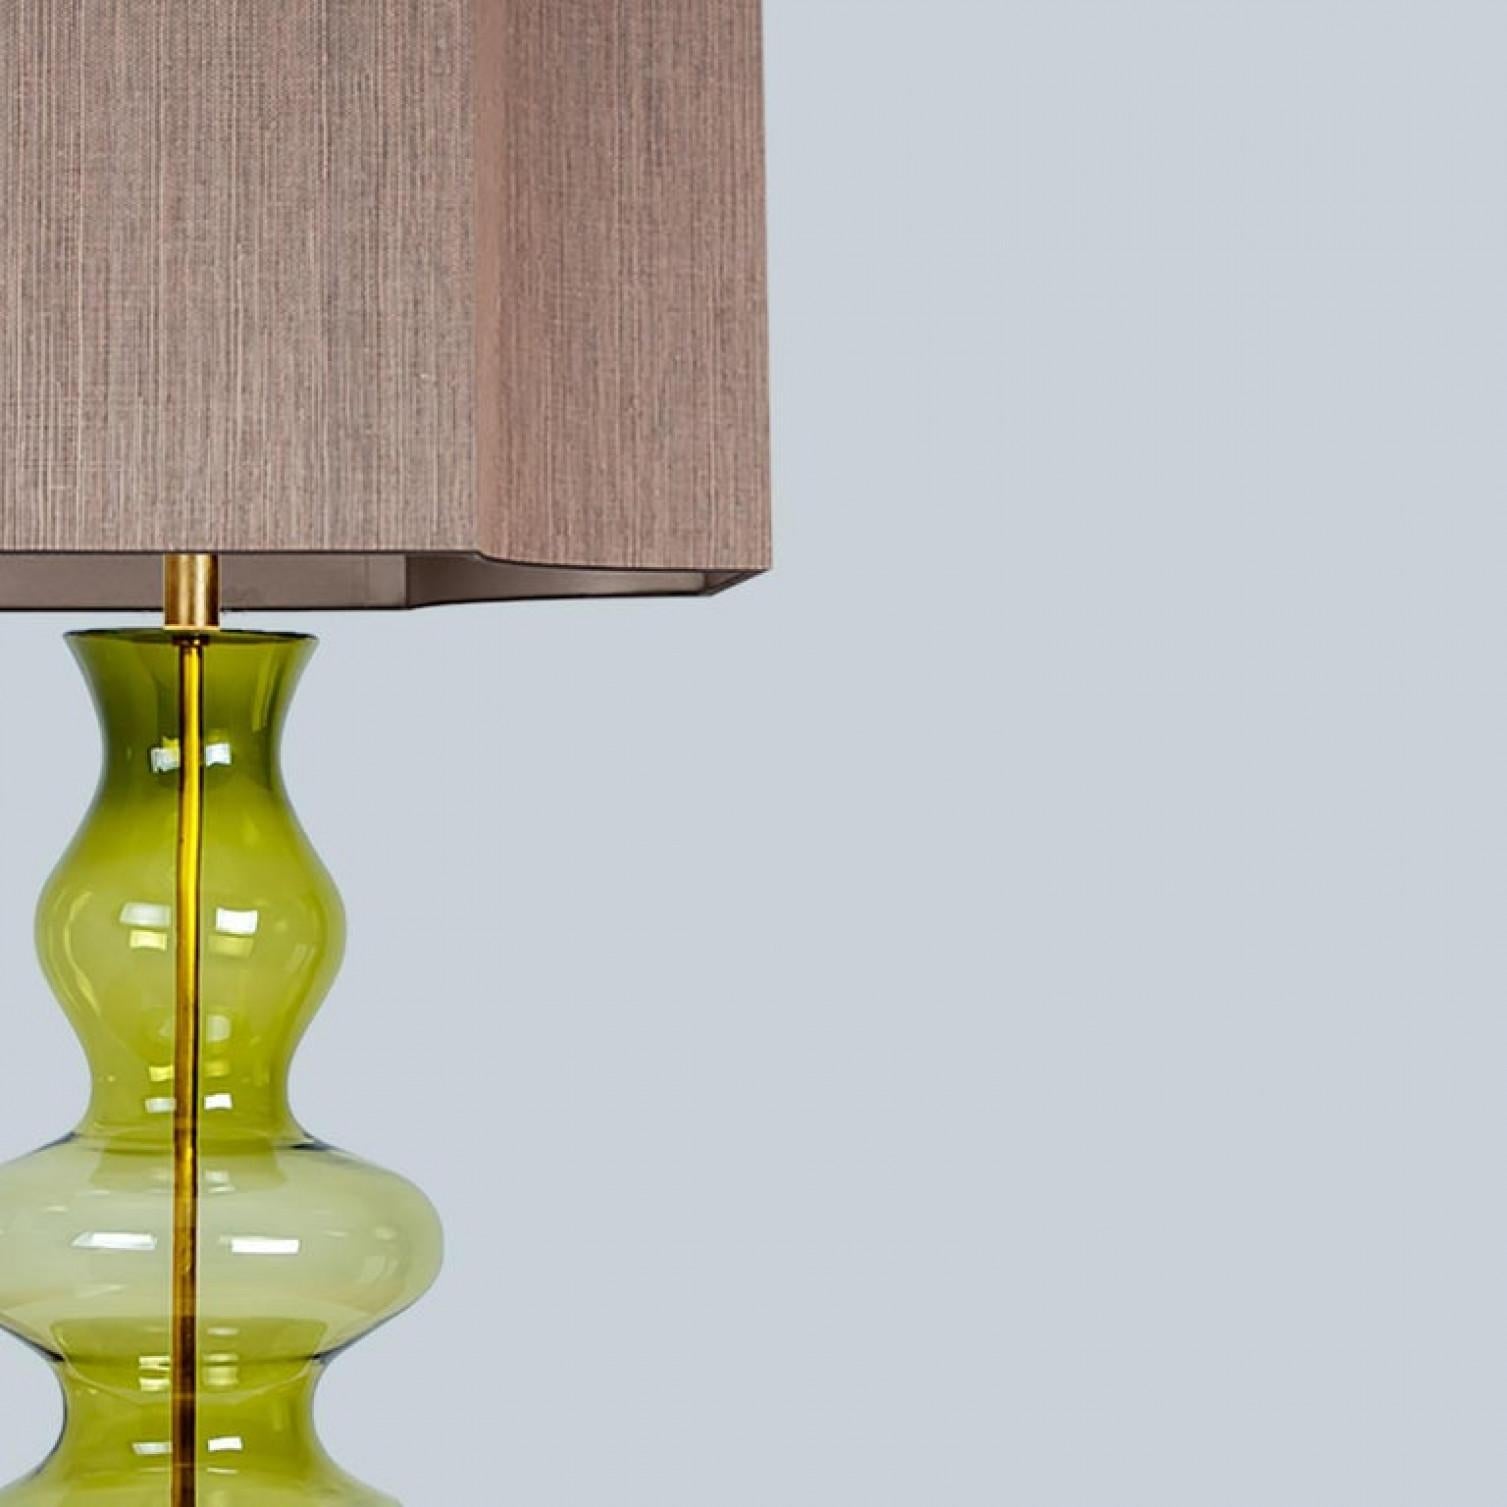 A unique Minimalist timeless design. Each extra large glass table lamp features a green exceptional transparent shaped base with a solid walnut wooden foot with old brass accents and a brass rod running through the center. Enhancing the light and